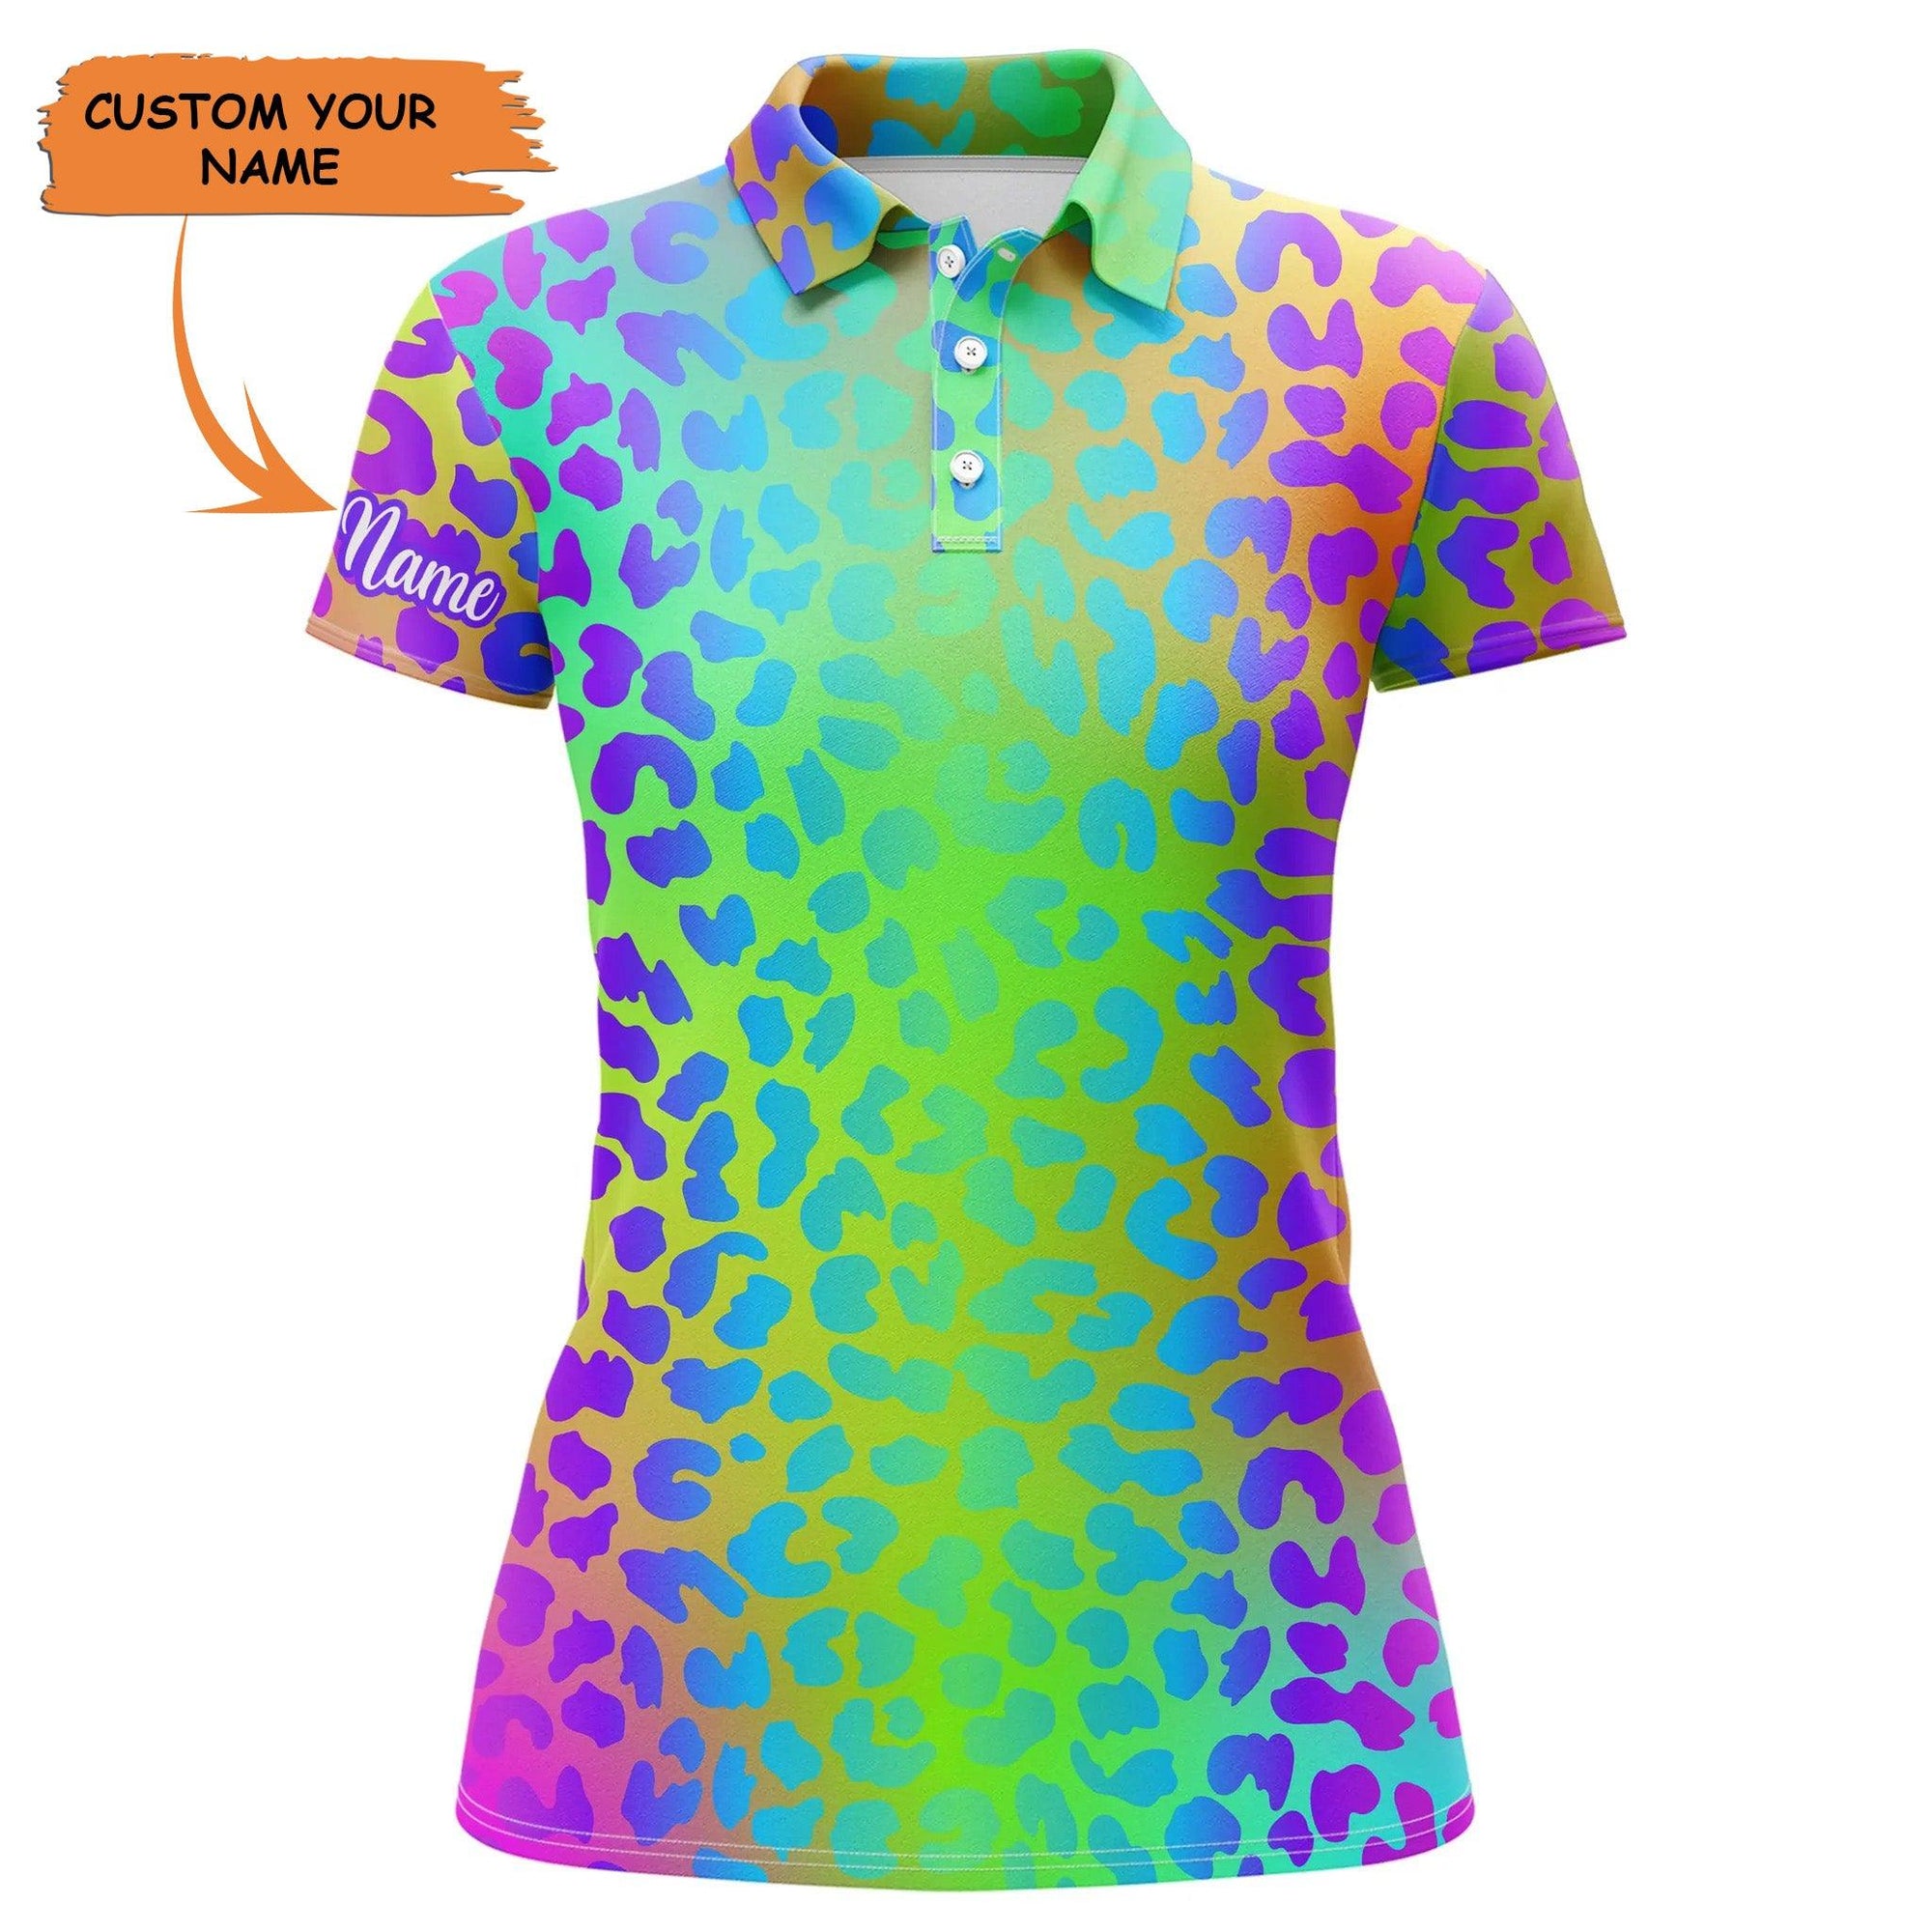 Customized Name Golf Women Polo Shirts, Neon Rainbow Leopard Print Personalized Ladies Pattern Golf Shirts - Perfect Gift For Golfers, Golf Lovers - Amzanimalsgift